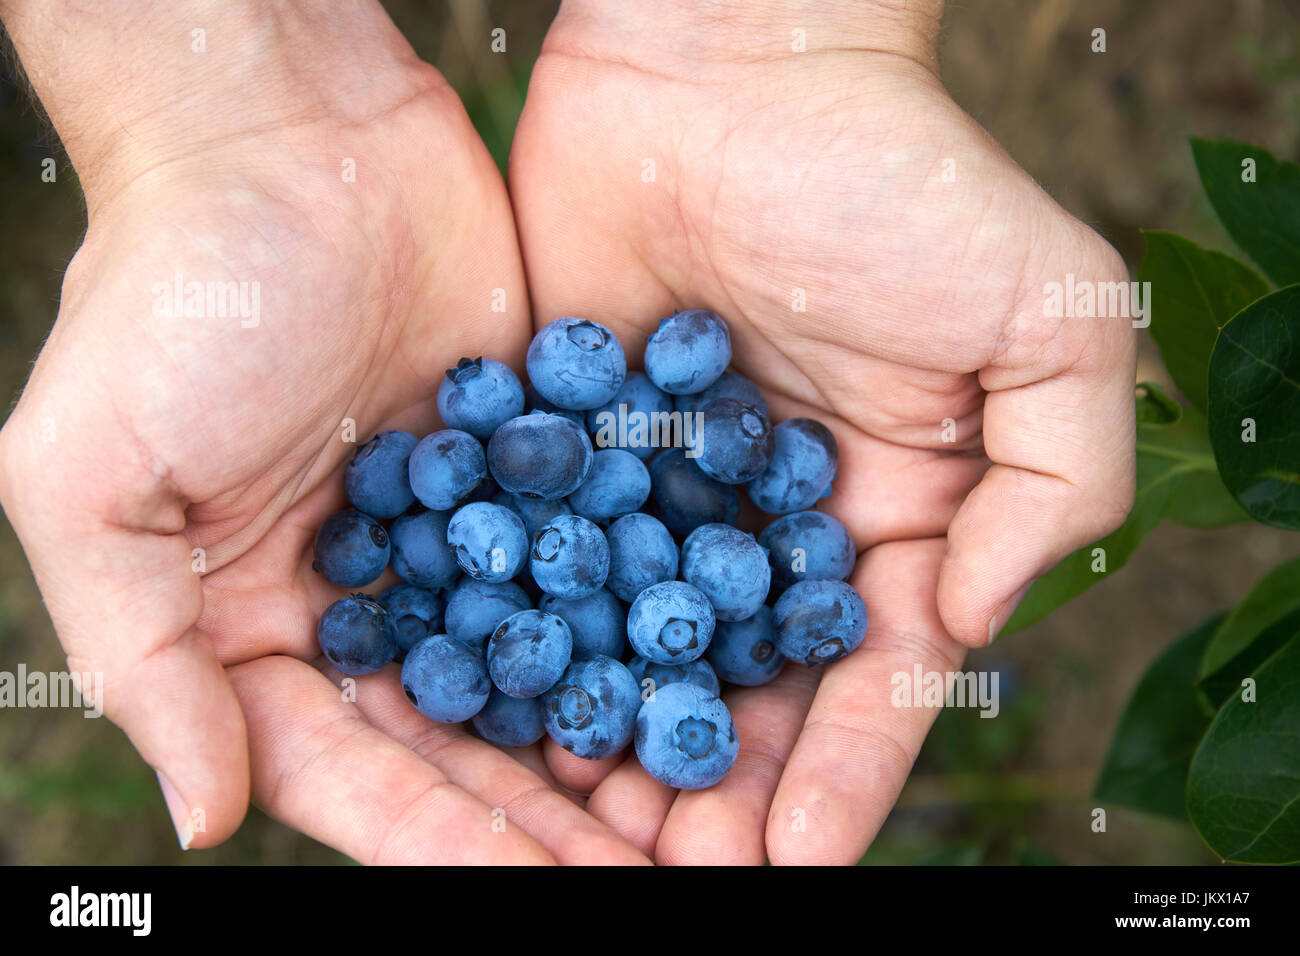 Male hand with resh organic blueberries from the bush. Top down view. Stock Photo